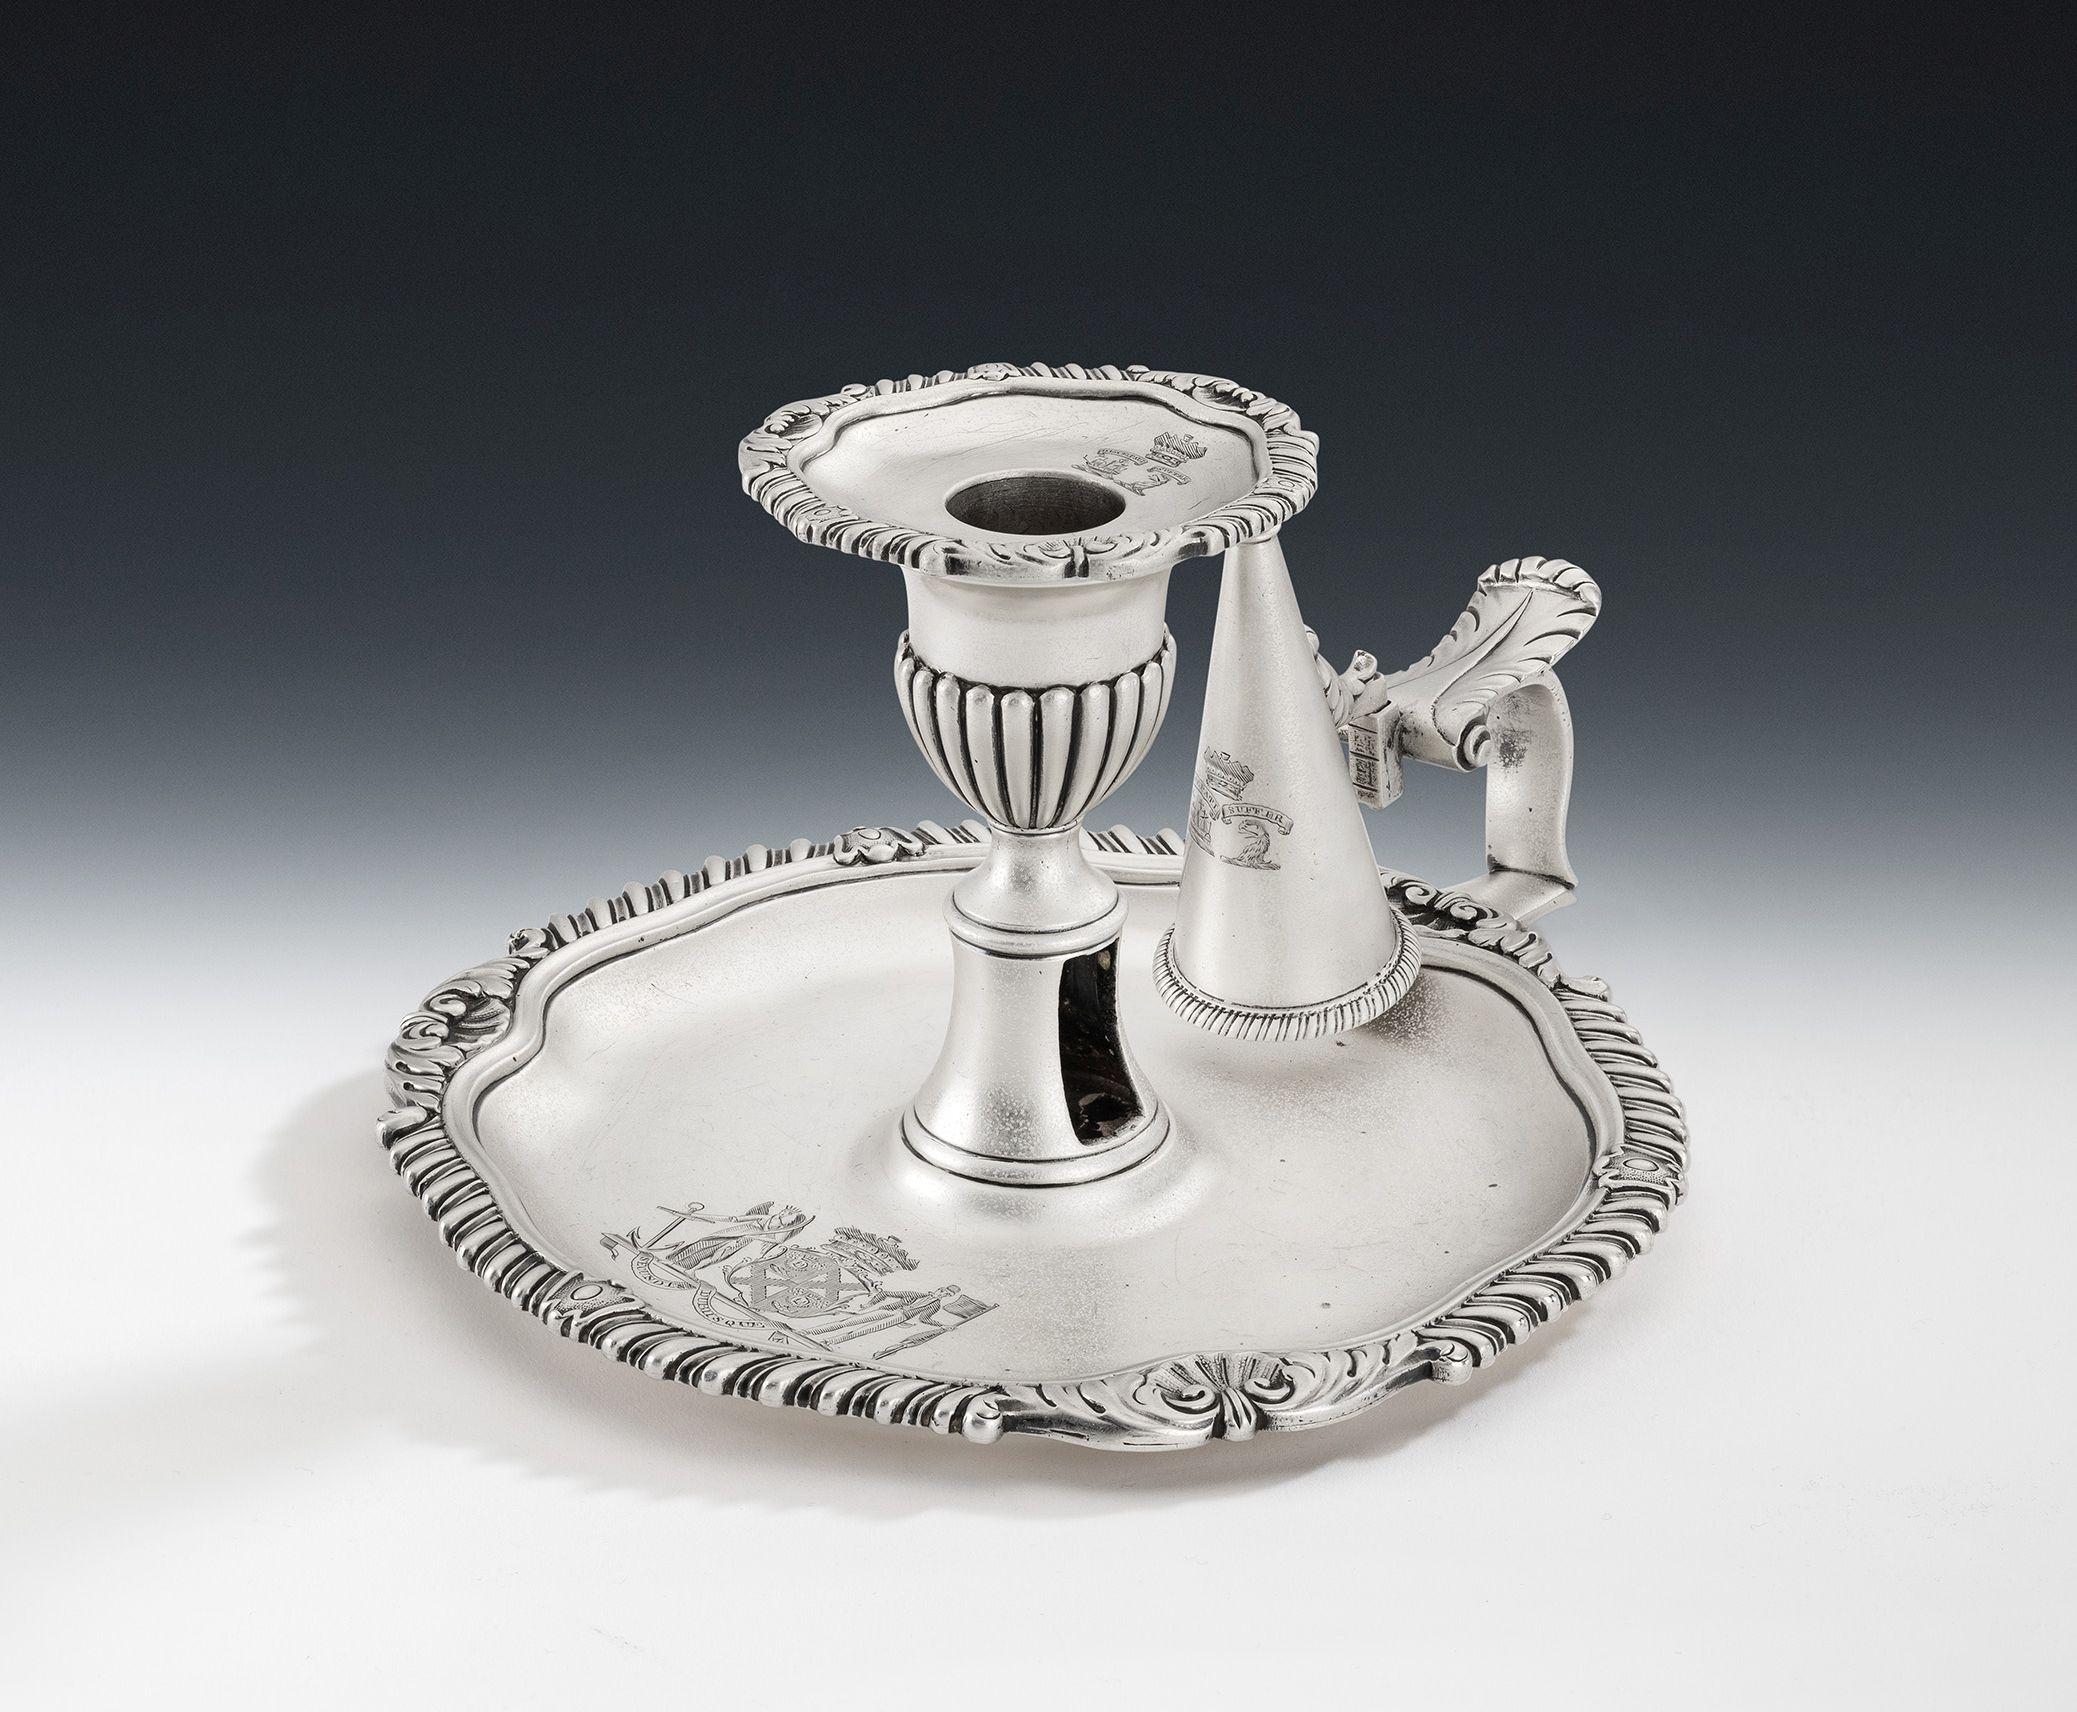 This exceptional chamber candlestick has a shaped circular base with raised rim decorated with gadrooning interspersed with anthemions as well as raying shells, flanked by acanthus leaves. The central shaft rises to a tulip shaped capital decorated